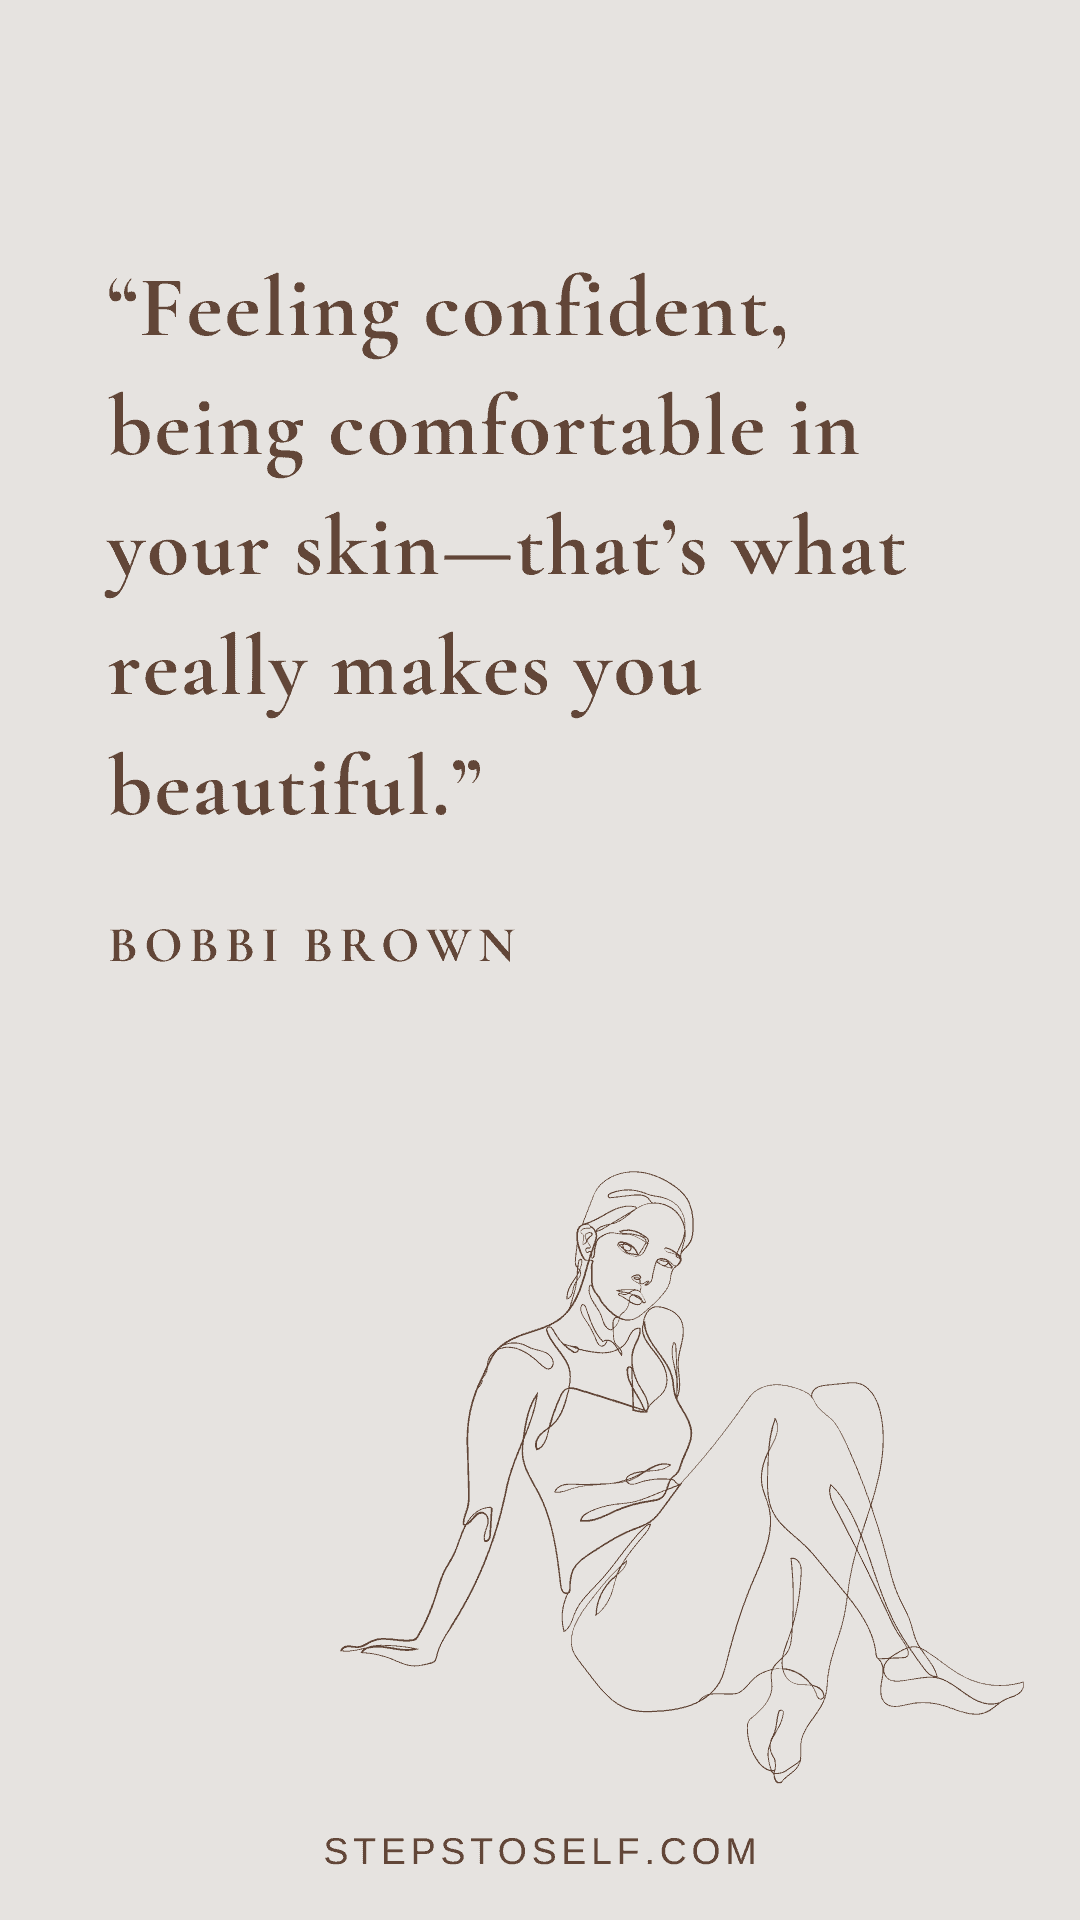 "Feeling confident, being comfortable in your skin--that's what really makes you beautiful." -Bobbi Brown